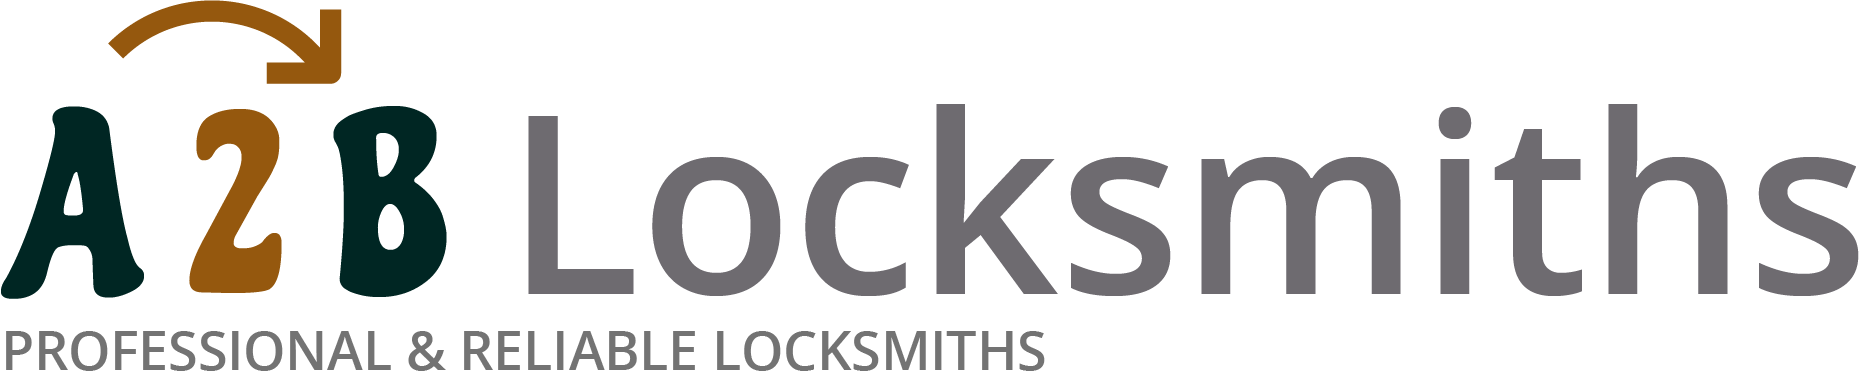 If you are locked out of house in Droitwich, our 24/7 local emergency locksmith services can help you.